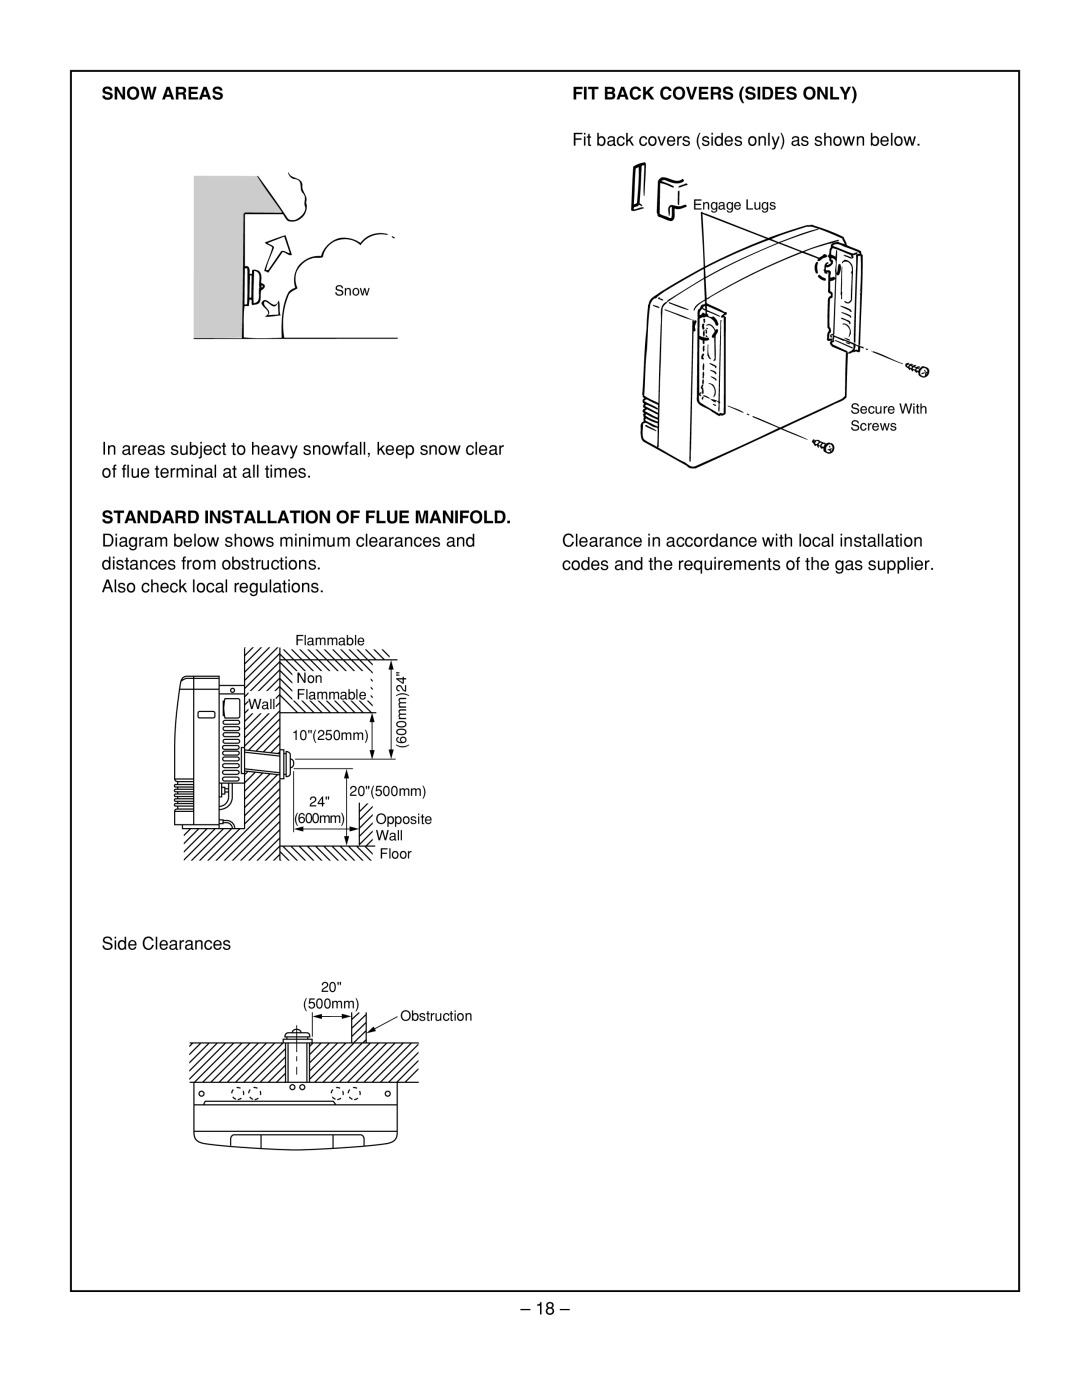 Rinnai RHFE-431WTA installation manual Snow Areas, Standard Installation Of Flue Manifold, Fit Back Covers Sides Only 